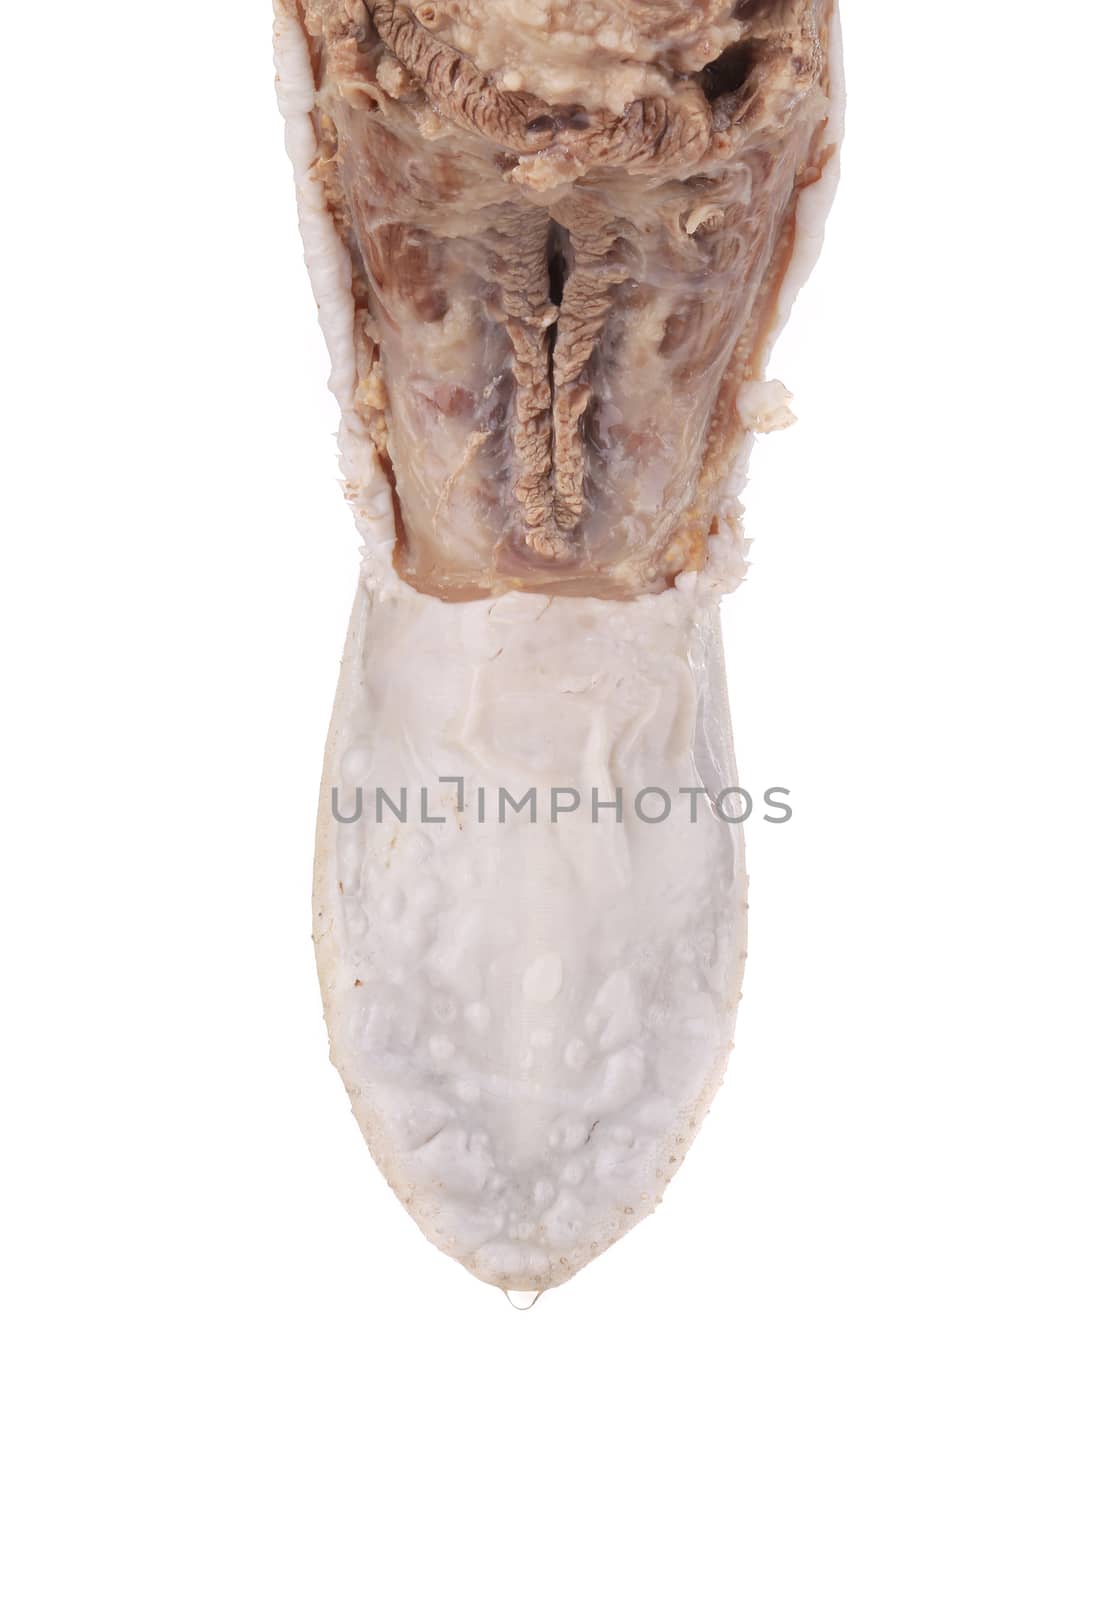 Raw beef tongue. Top view. Isolated on a white background.